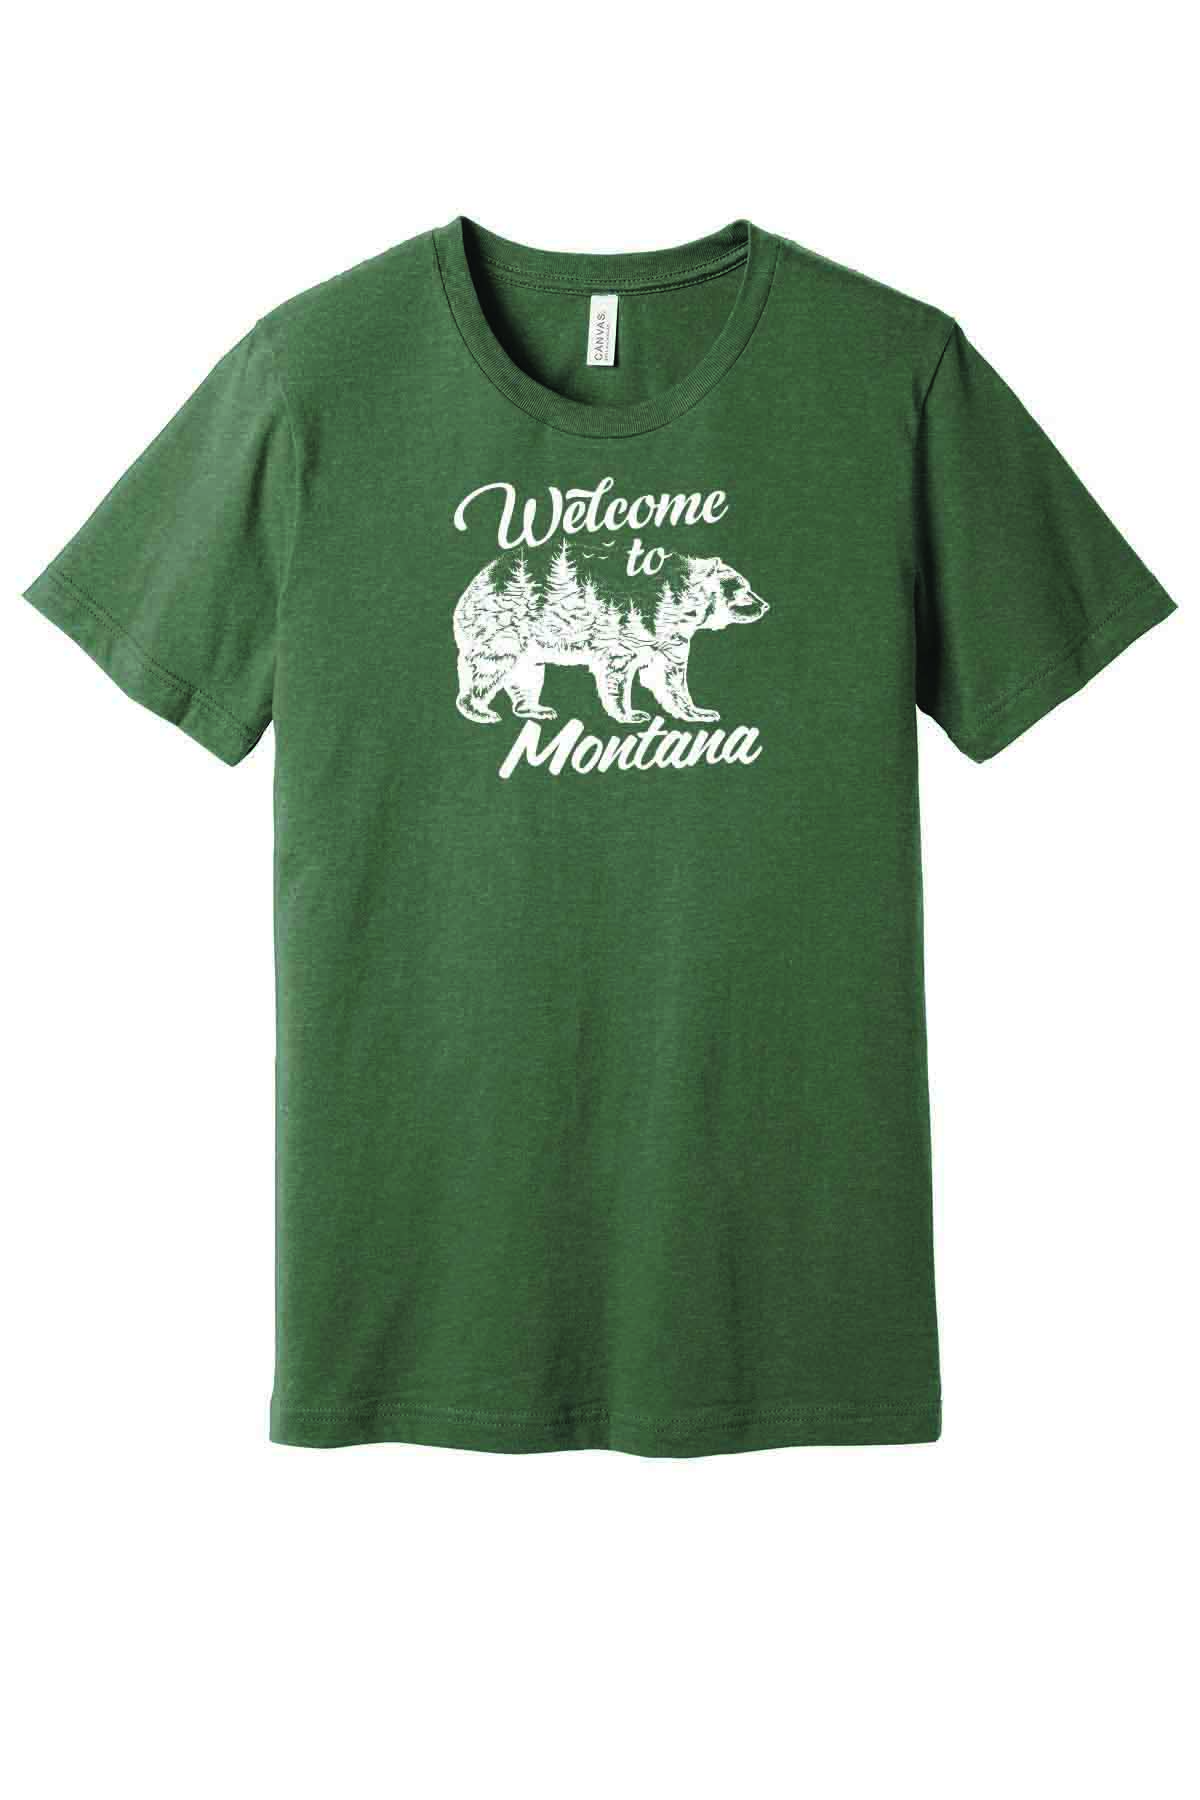 Featured image for “Tourist Tee Welcome to MT Bear (Multiple Colors)”